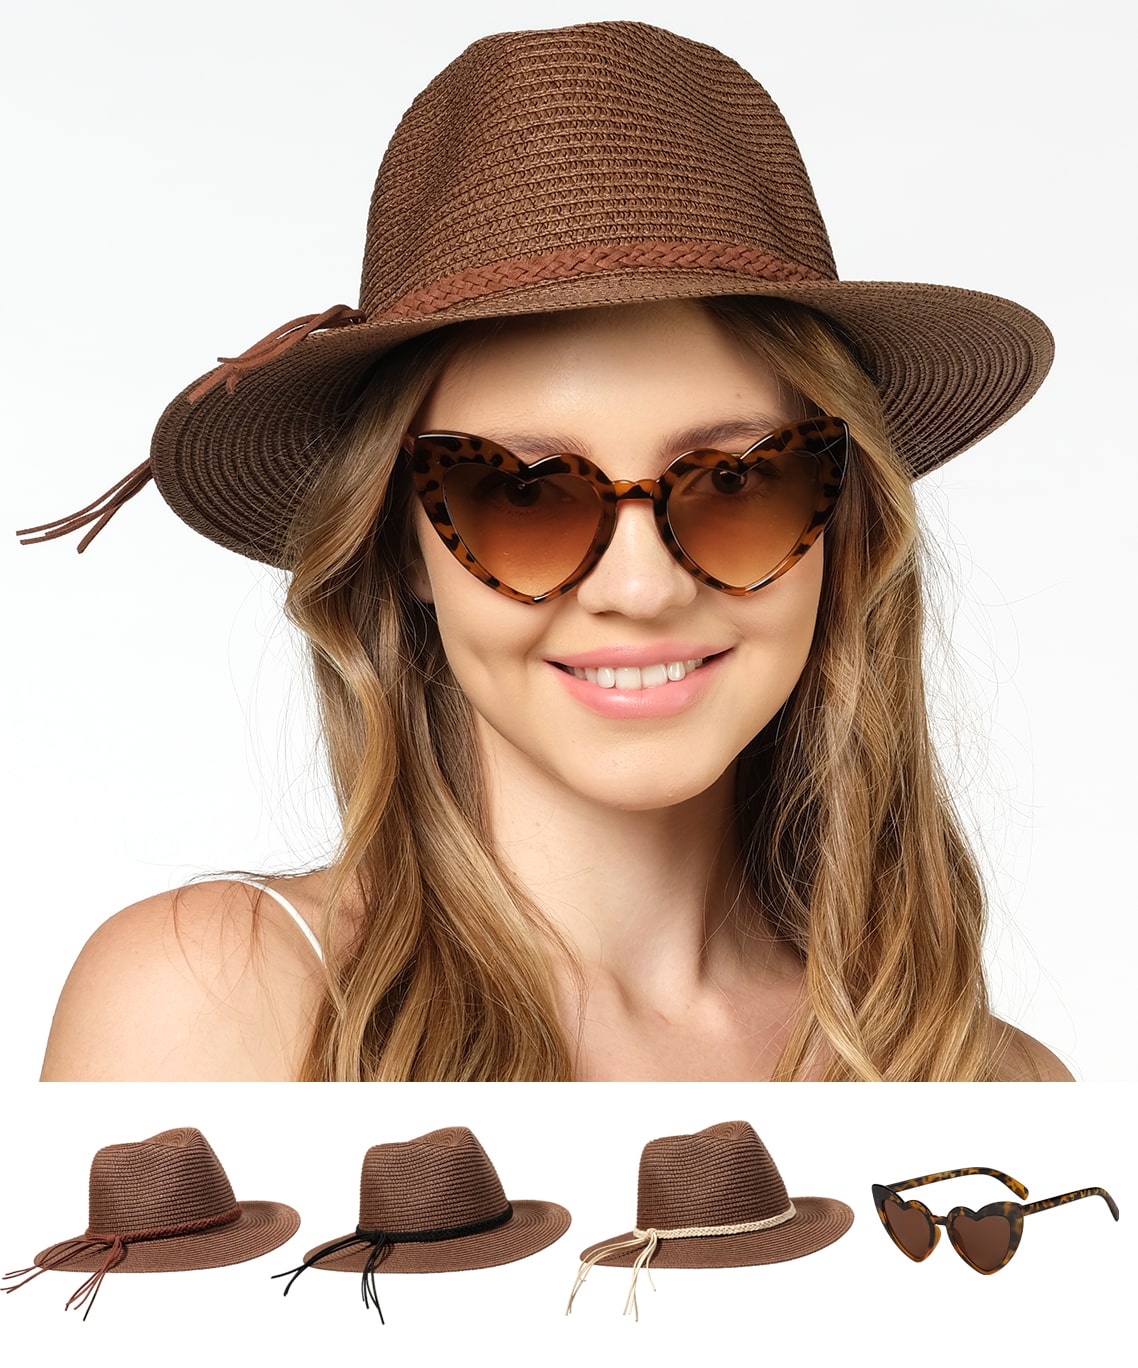 Funcredible Straw Fedora Hat for Women - Panama Hat with Bows and Heart Shape Glasses - Foldable Sun Hat - Packable Beach Hat